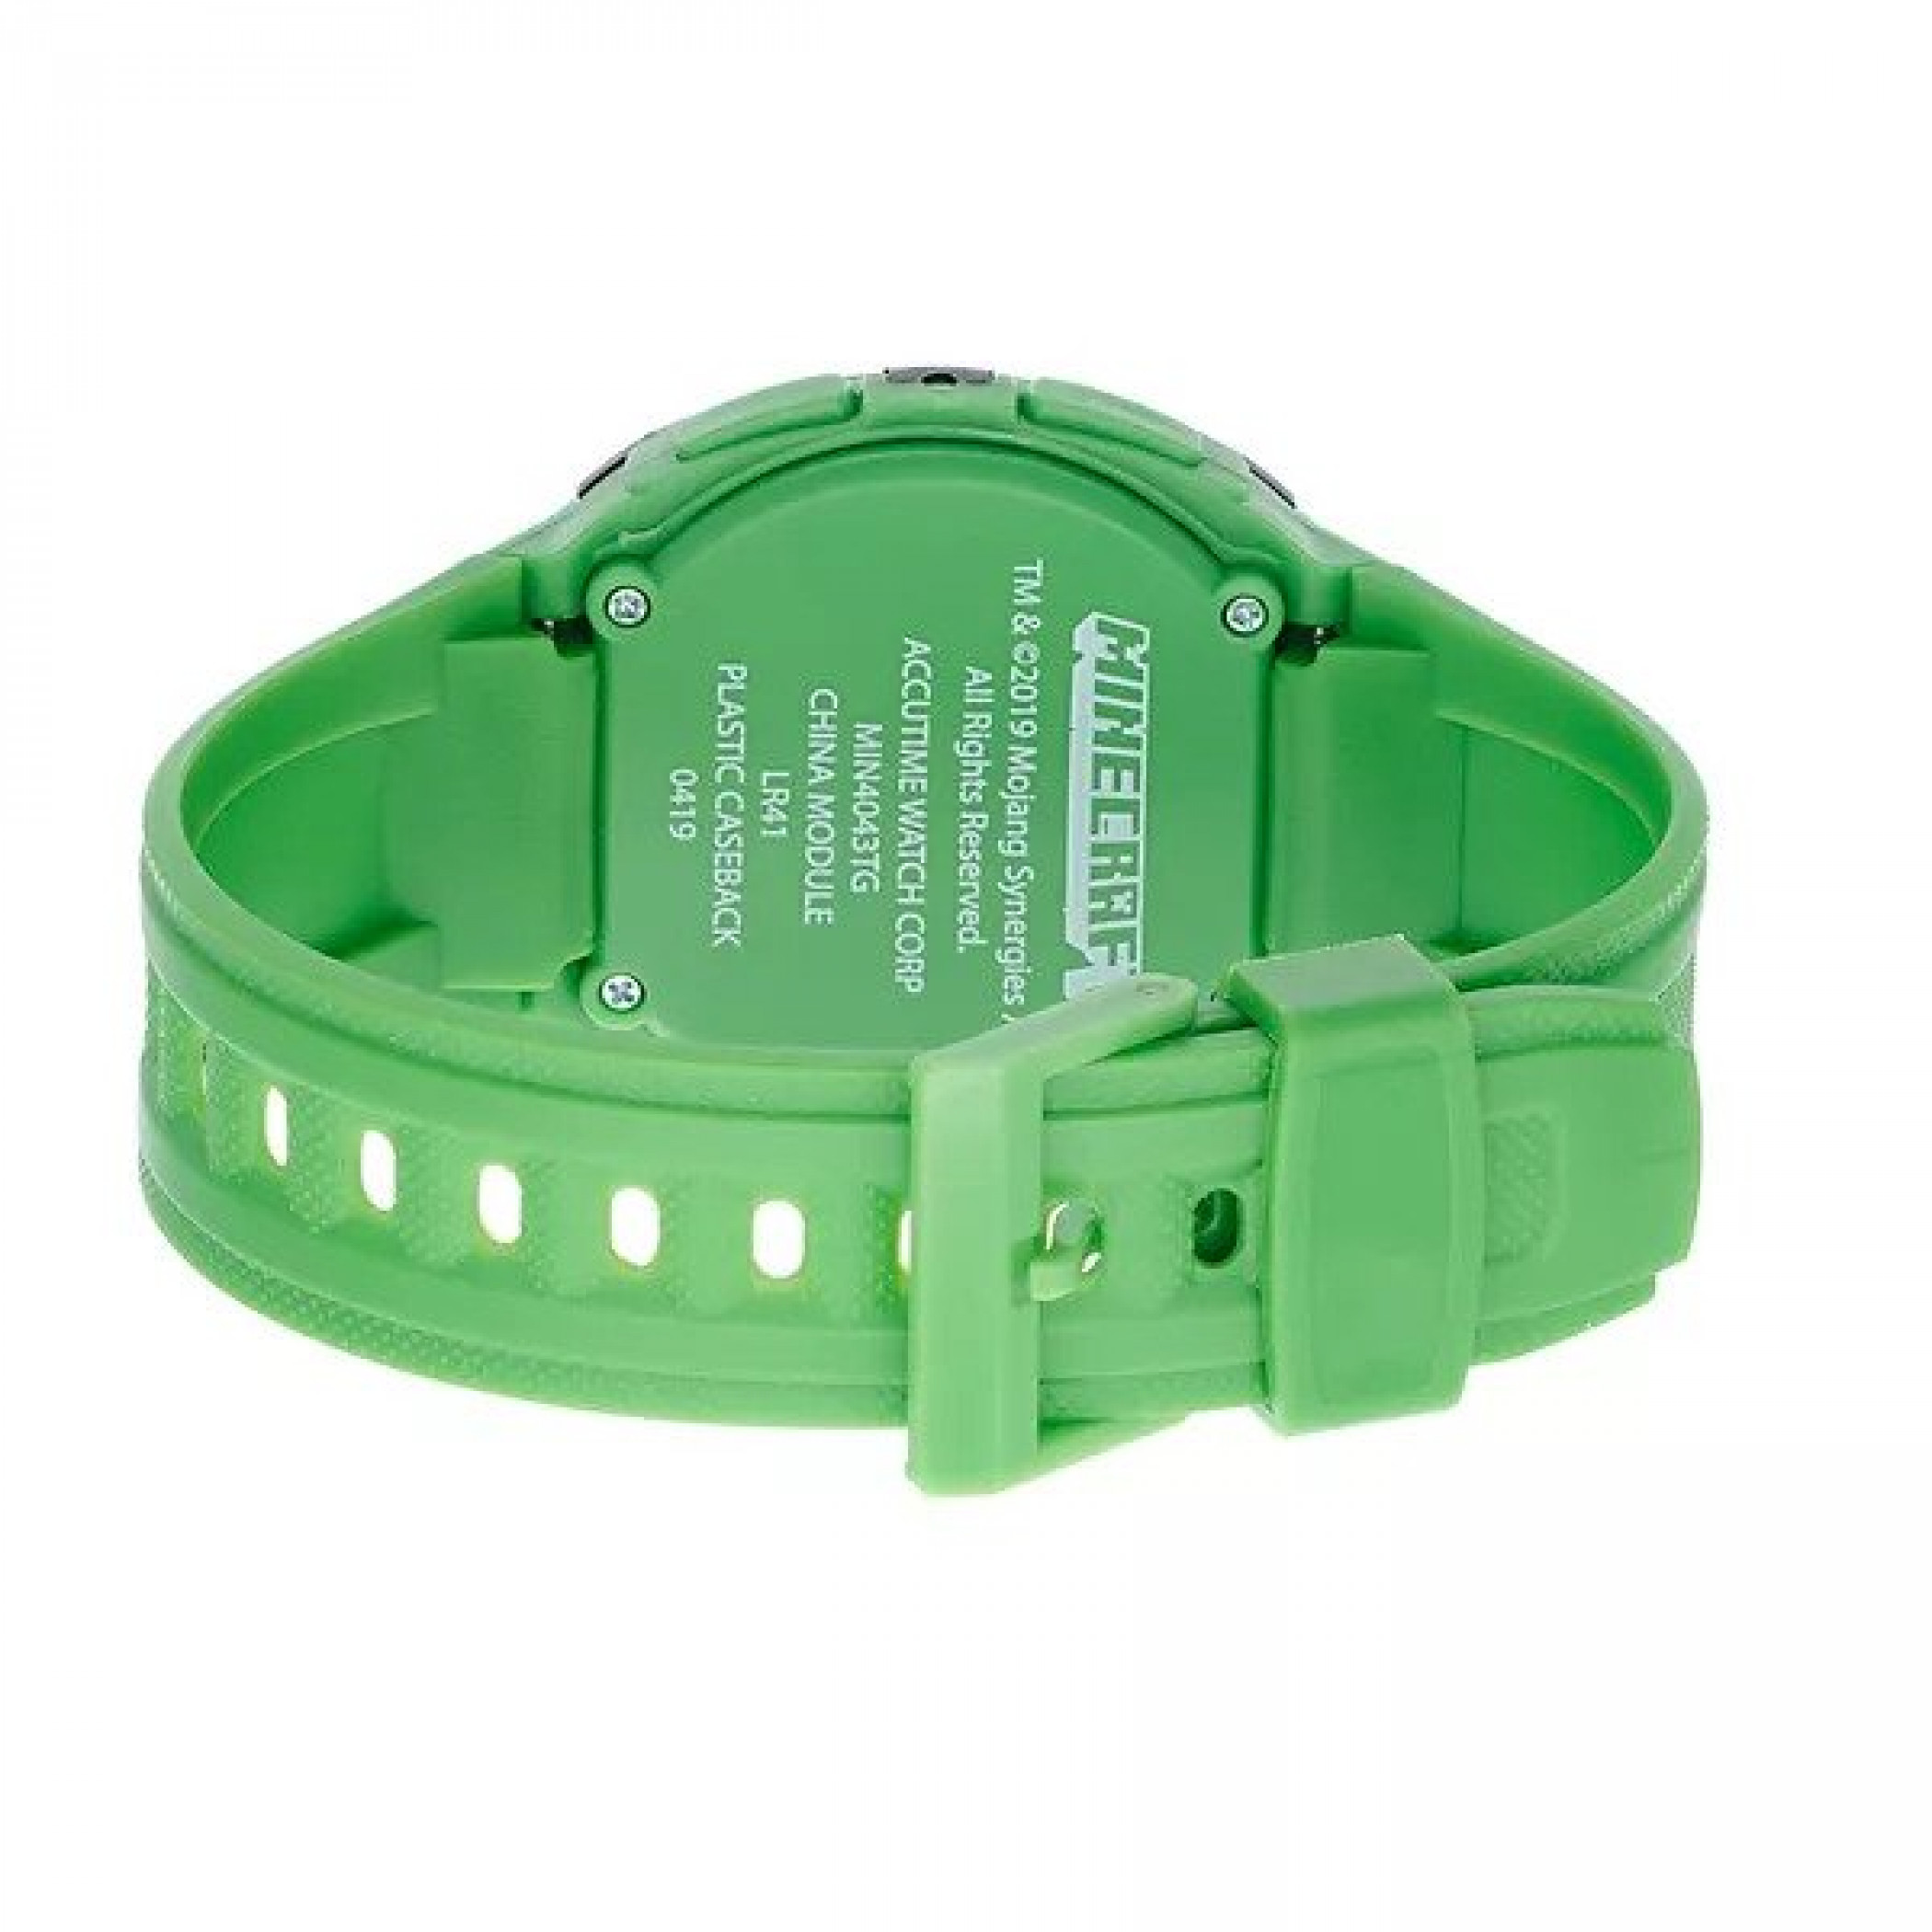 Minecraft Creeper Flashing LED Lights LCD Watch with Silicone Straps